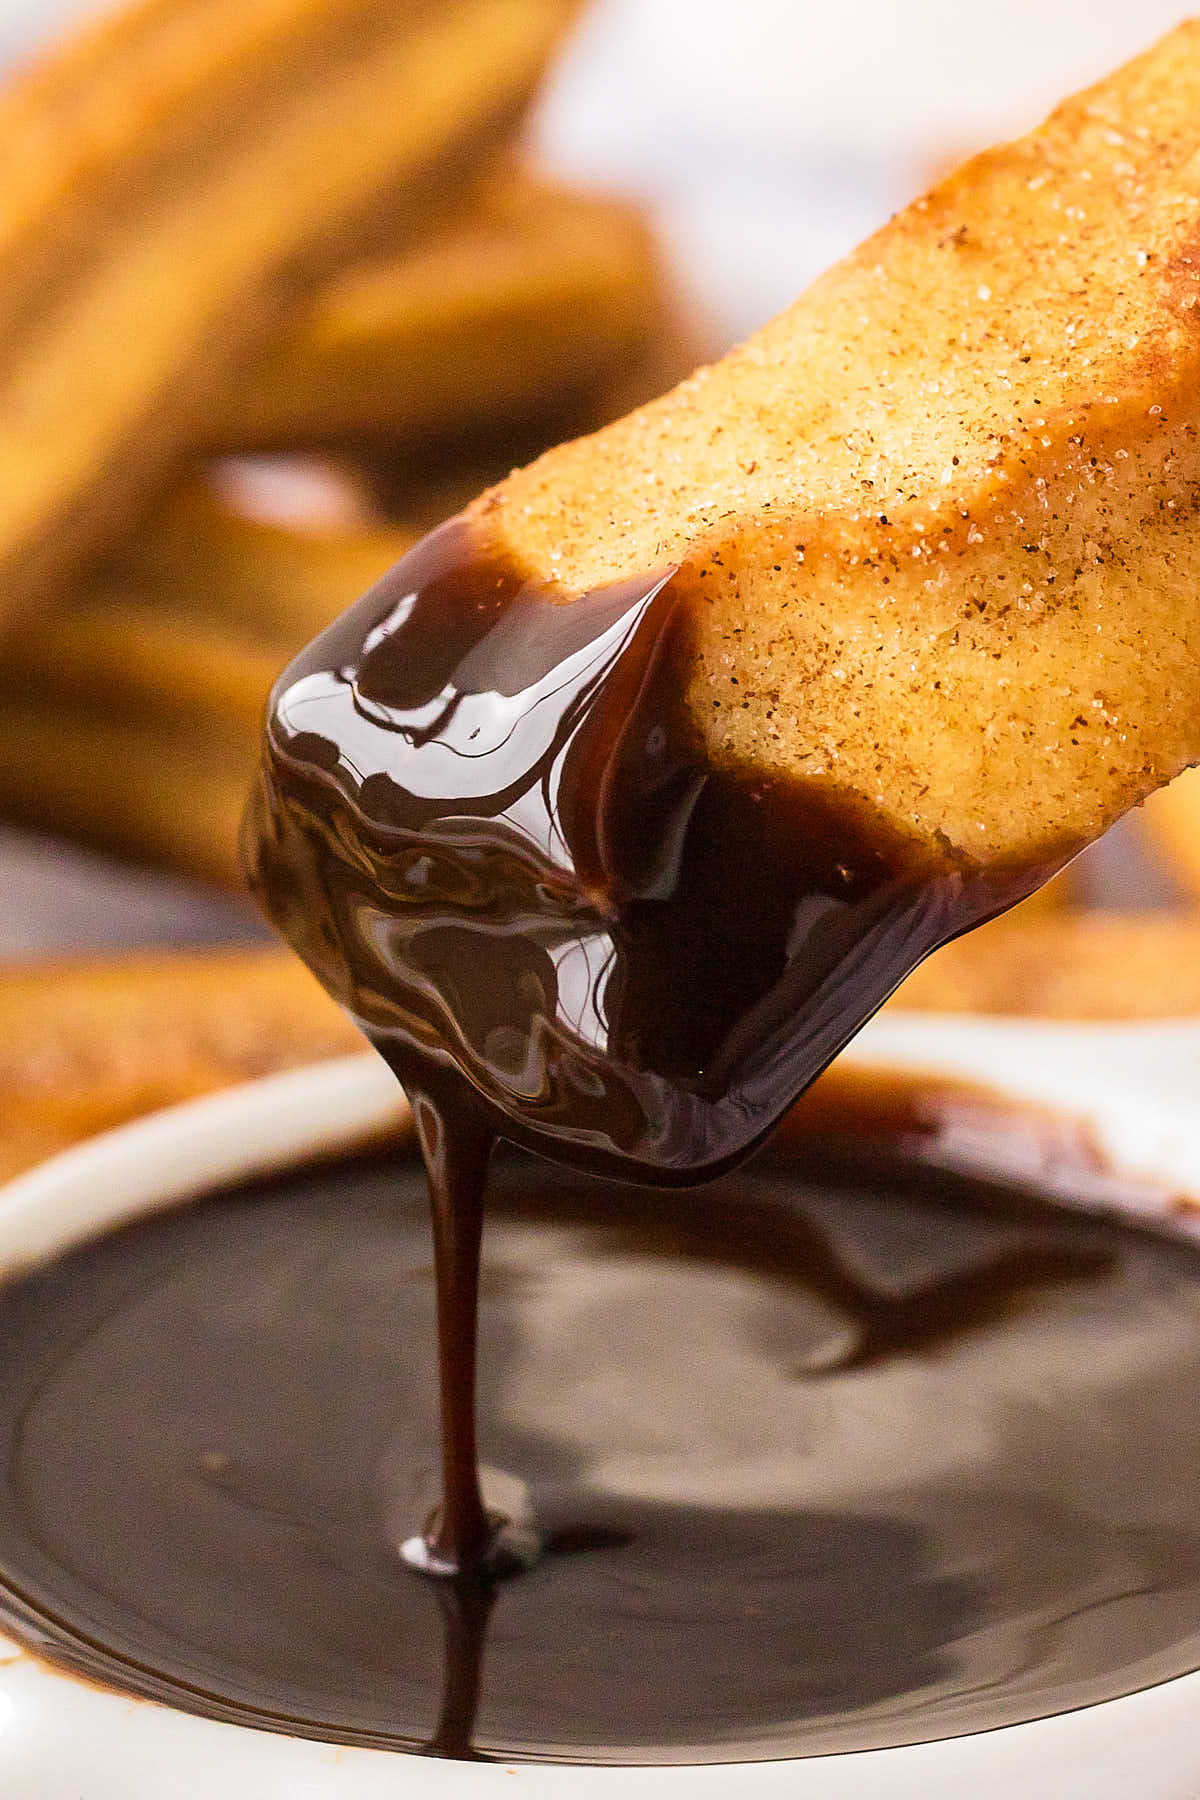 A baked Churro dipped in Chocolate.